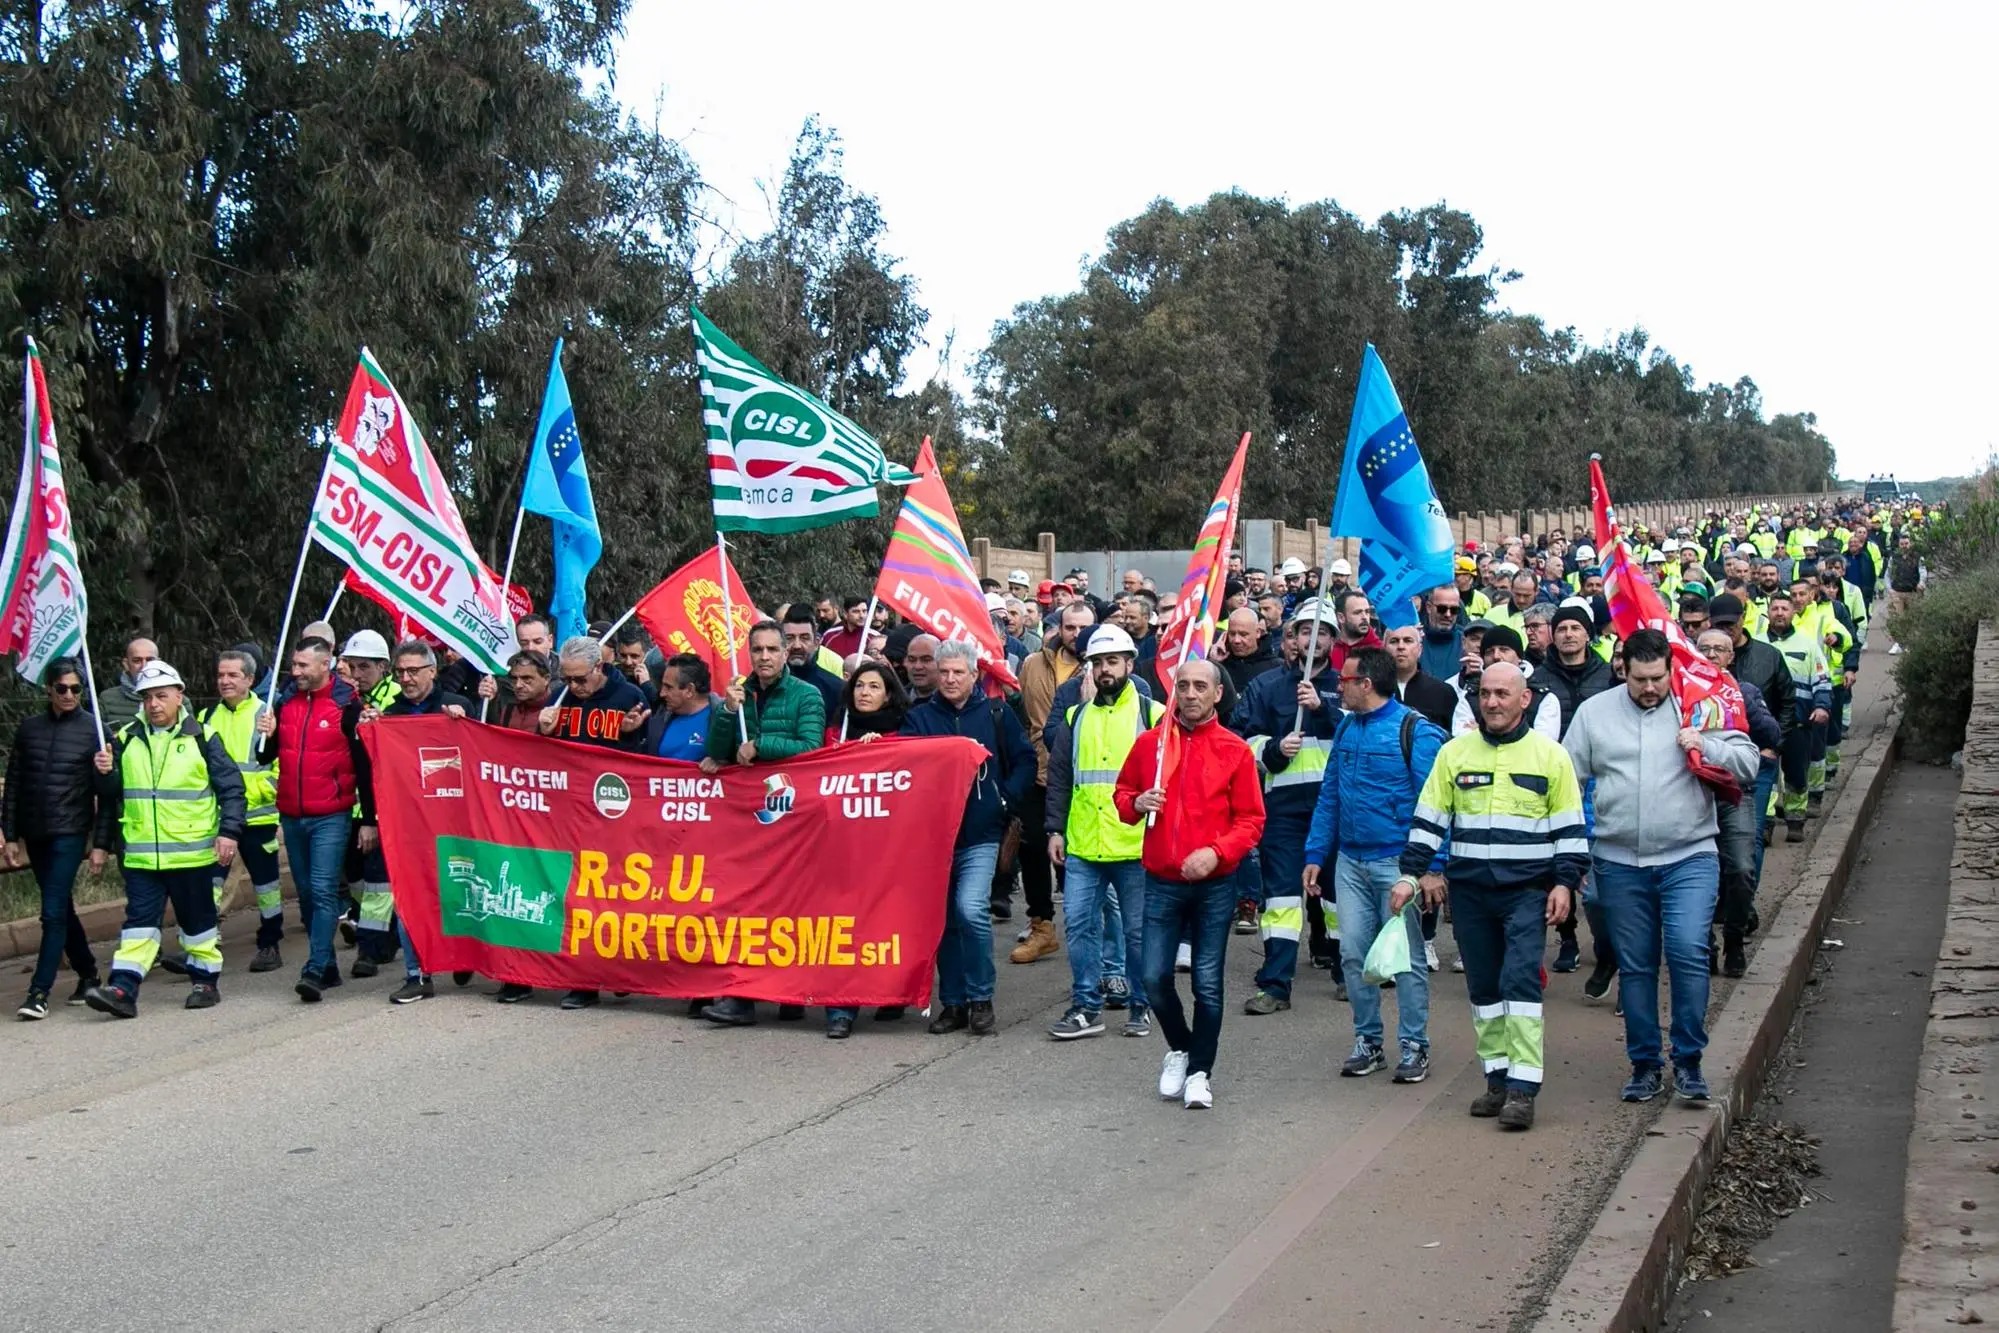 The Portovesme workers marching towards the main entrance (Photo Murru)